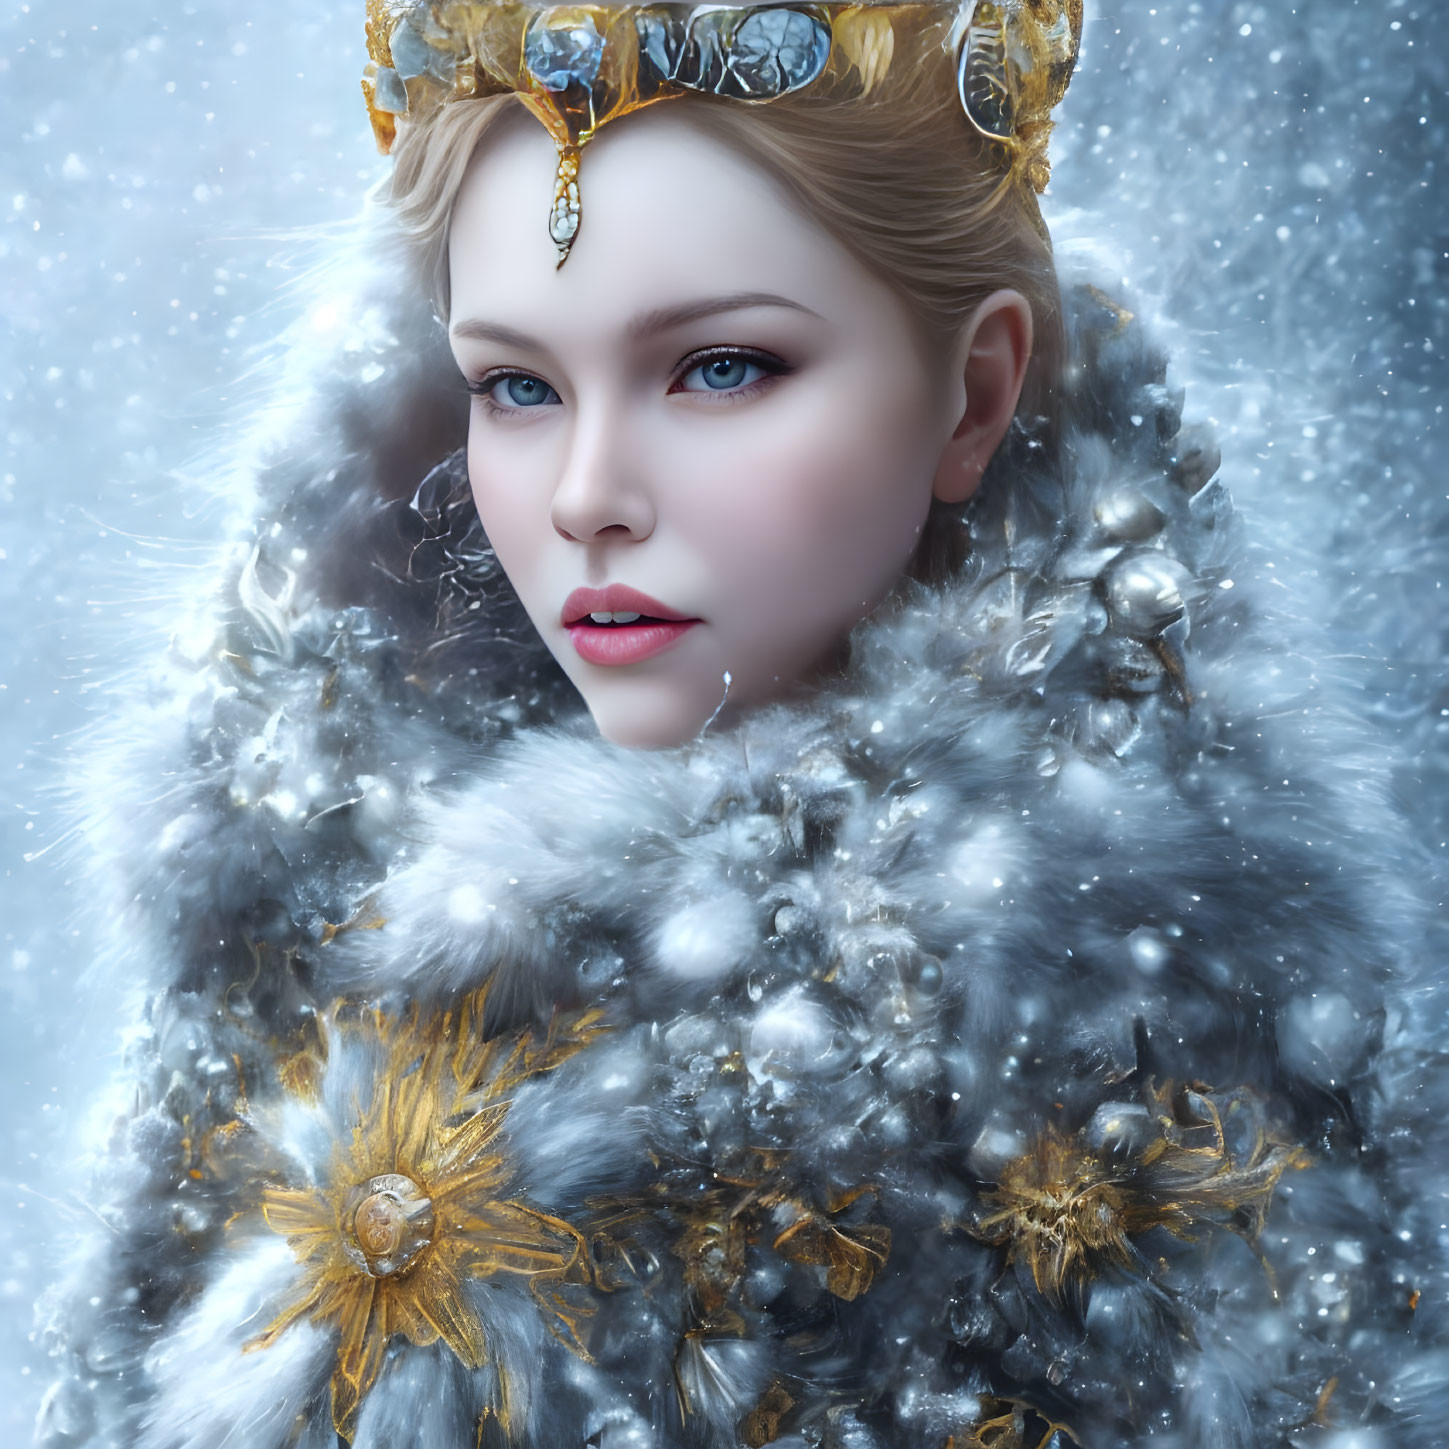 Regal woman with blue eyes in golden crown and fur cape in snowy setting